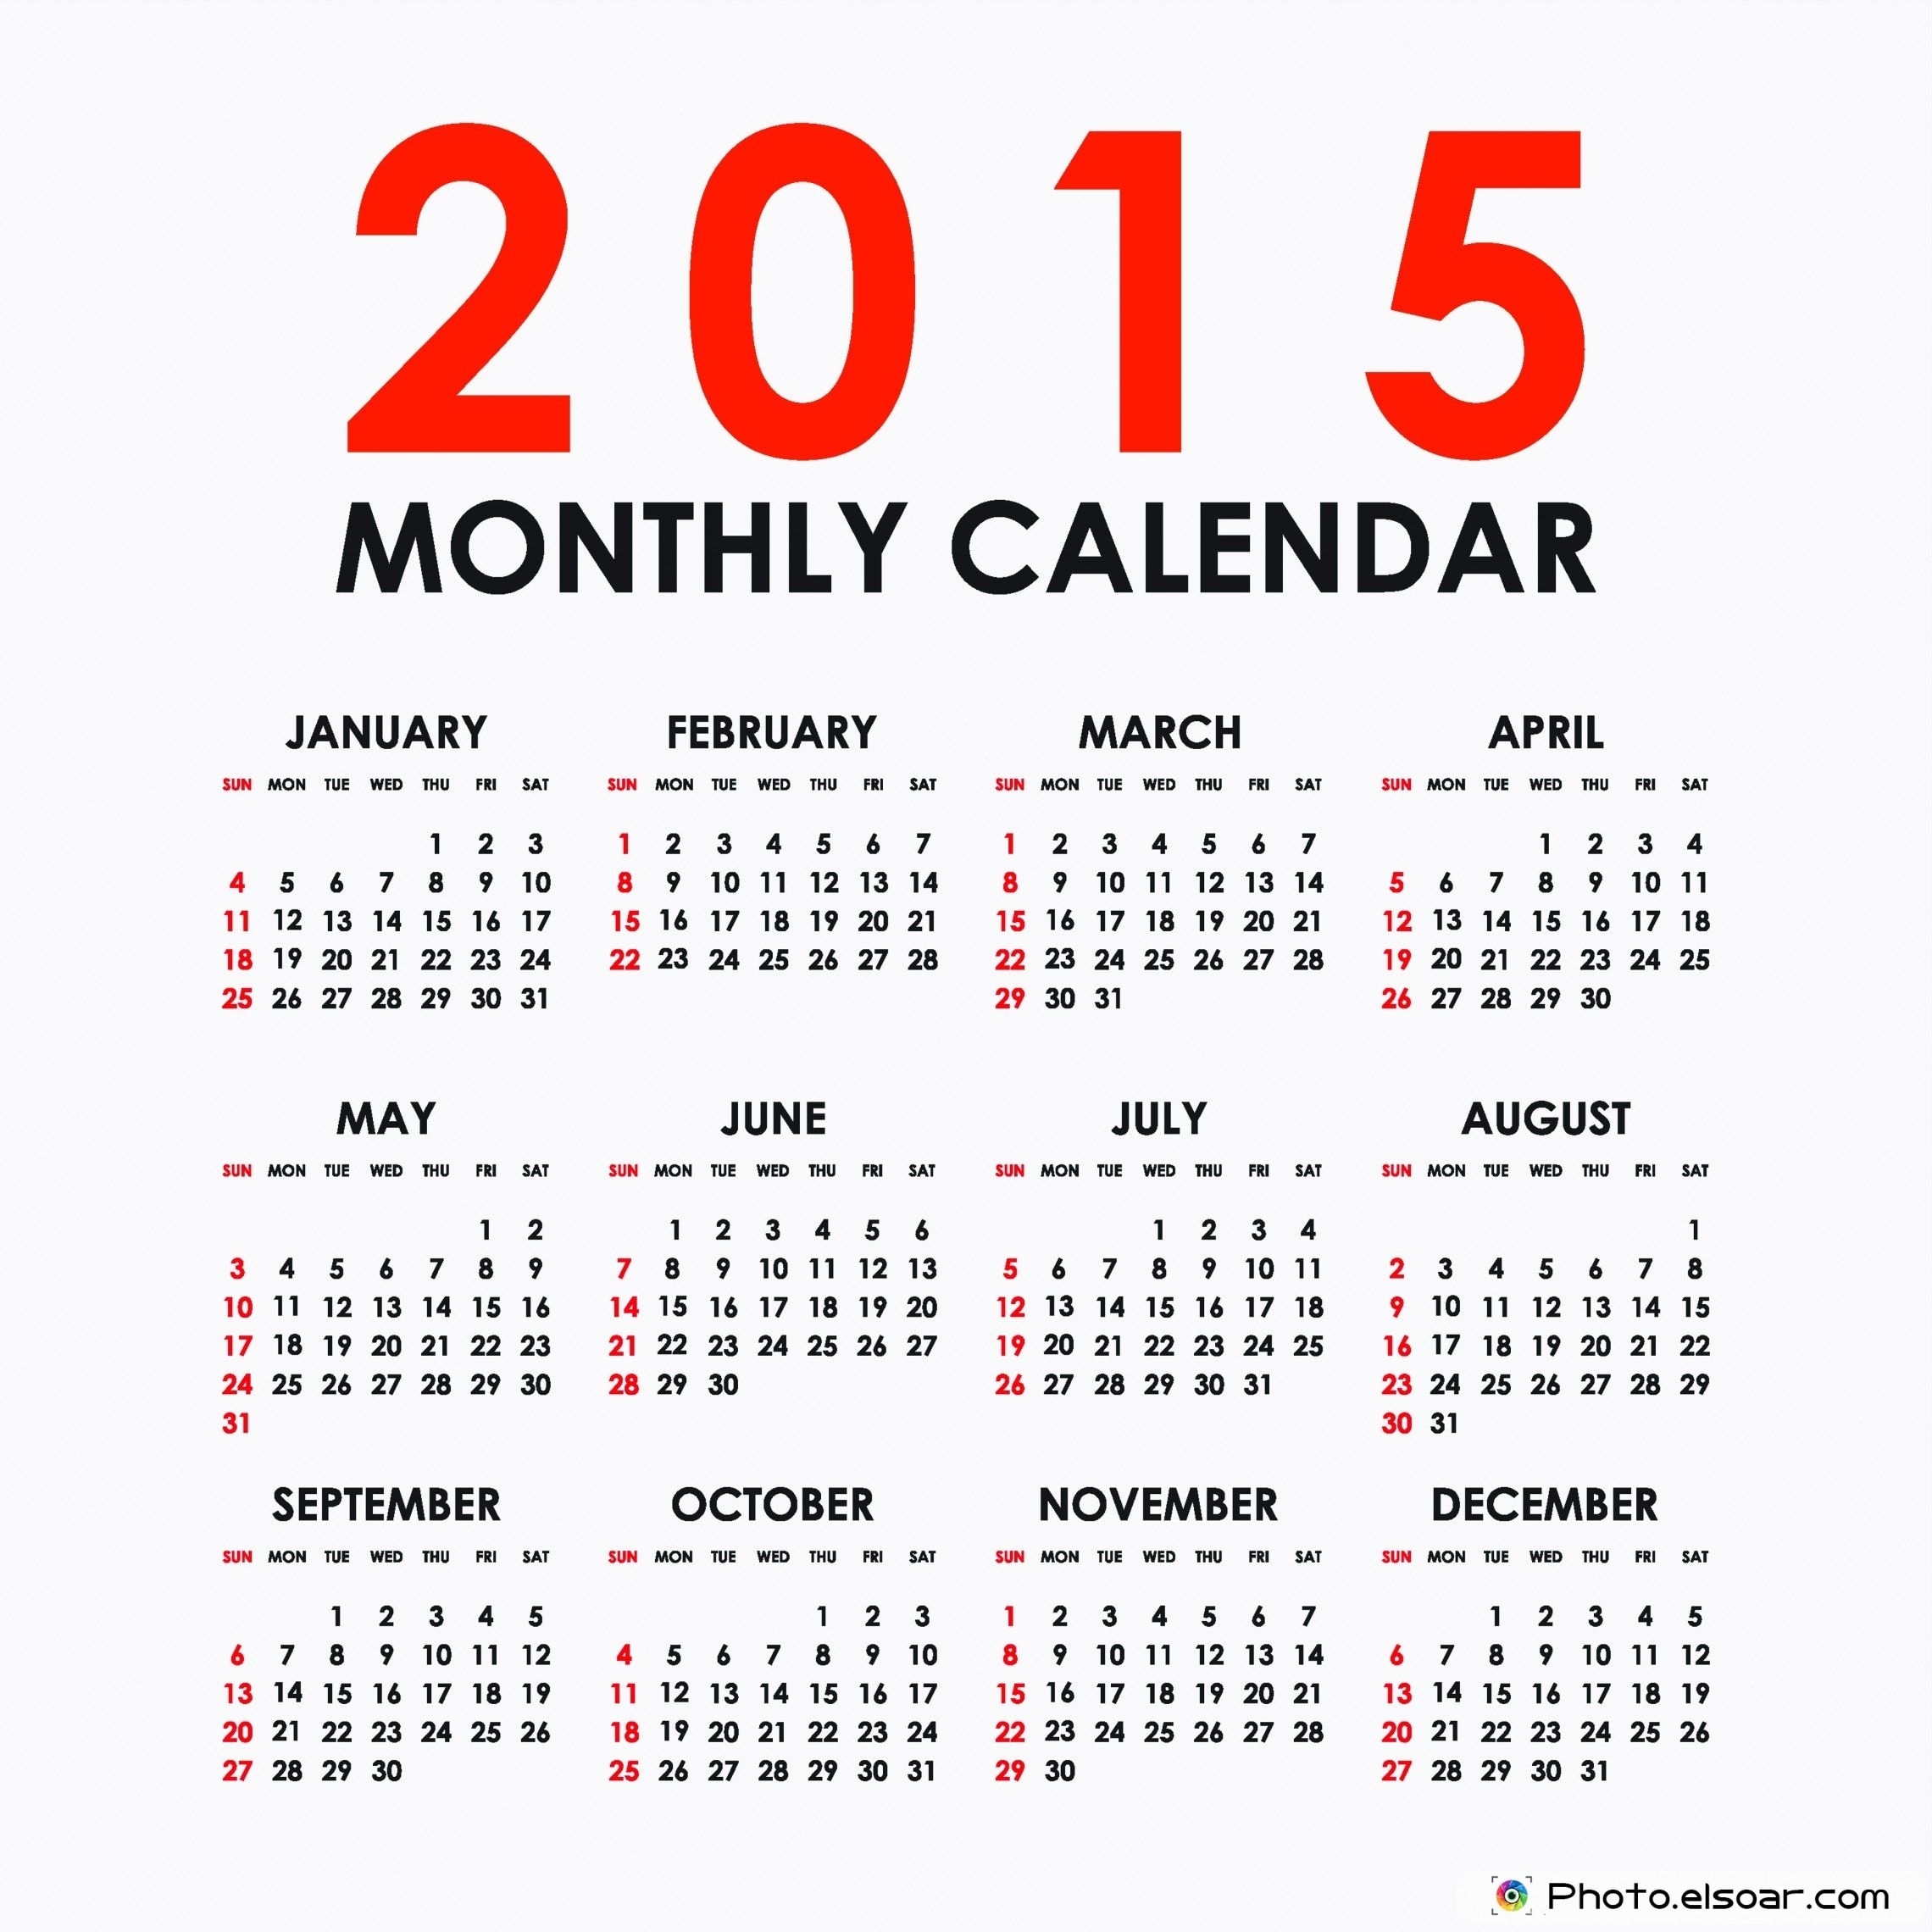 Ipad 2015 Calendar For Wallpaper Large | Simple Monthly 2015 Printing A Calendar From Ipad